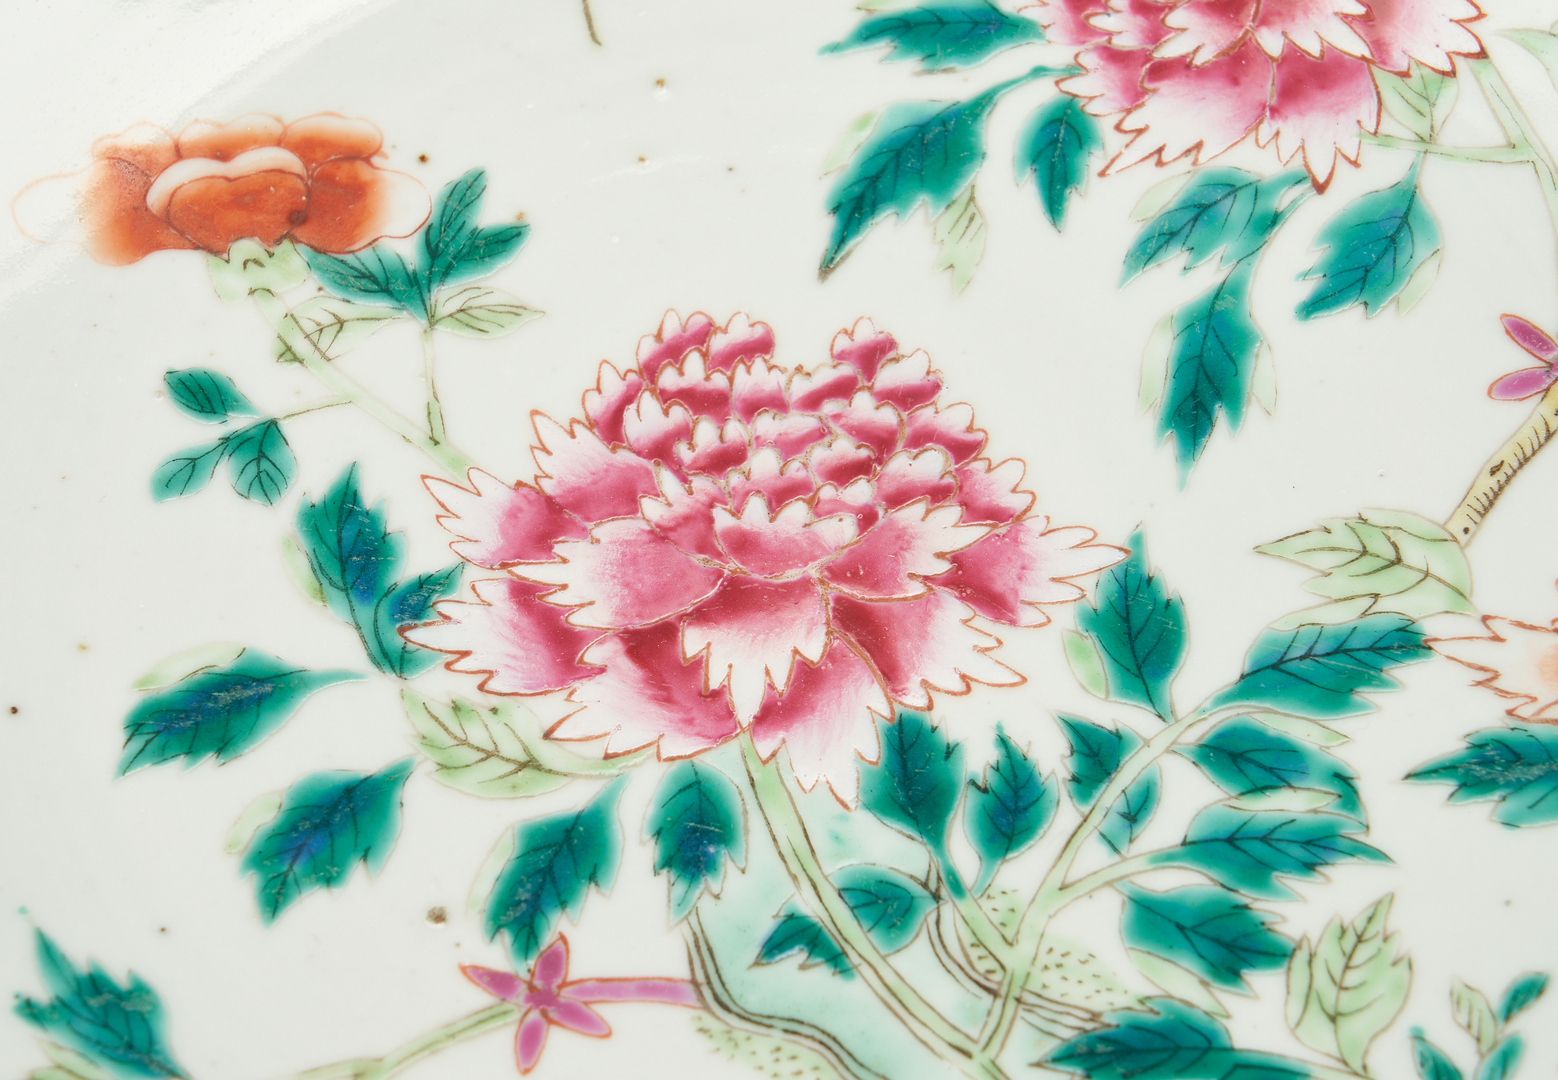 Lot 421: Chinese Export Famille Rose Porcelain Plate and Charger